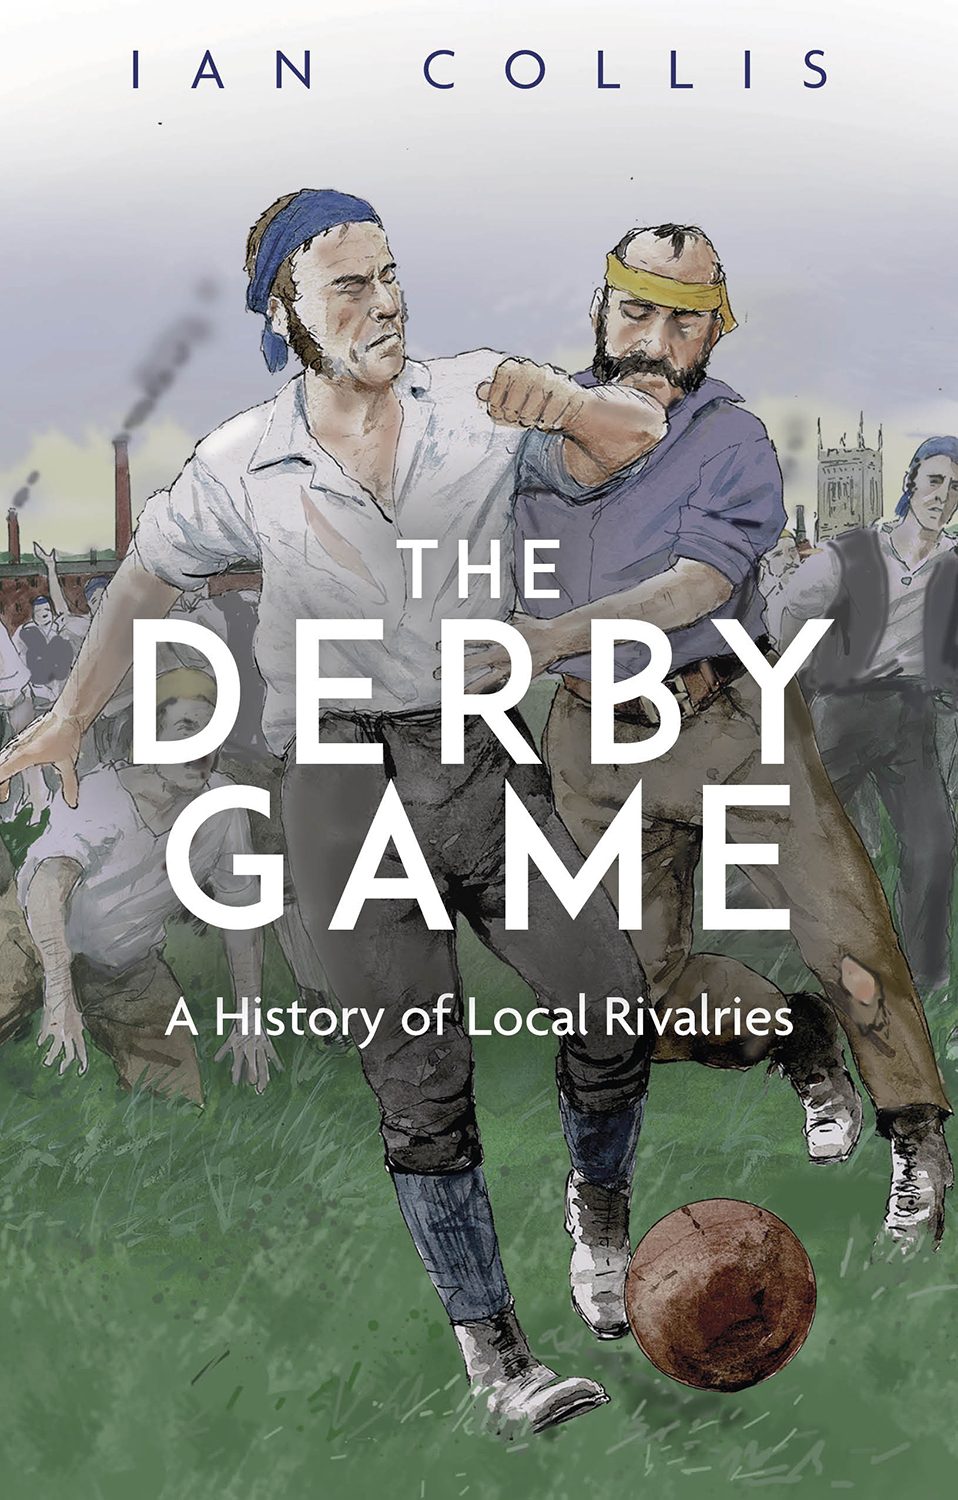 The Derby Game